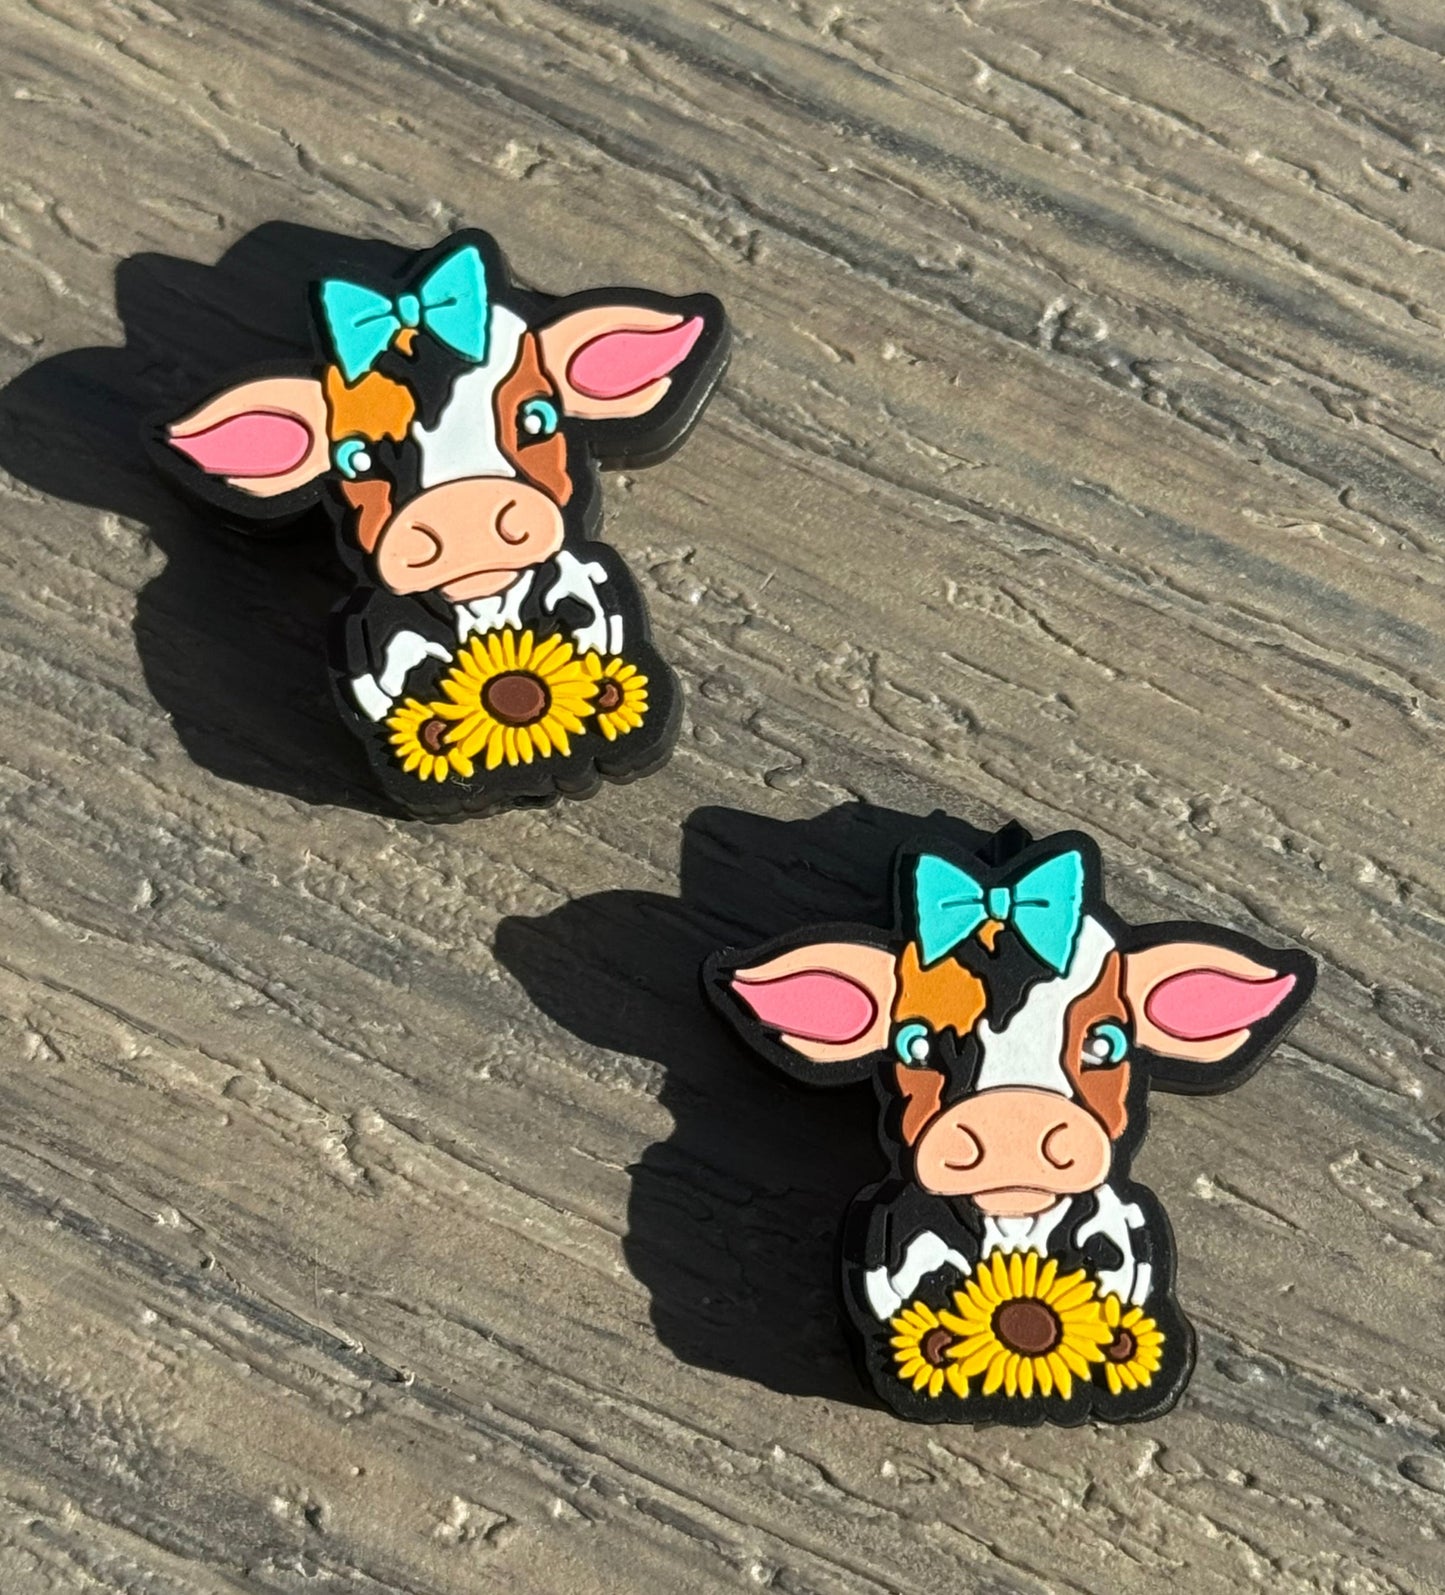 Miss Moo Focal Bead- Available in TWO colors!